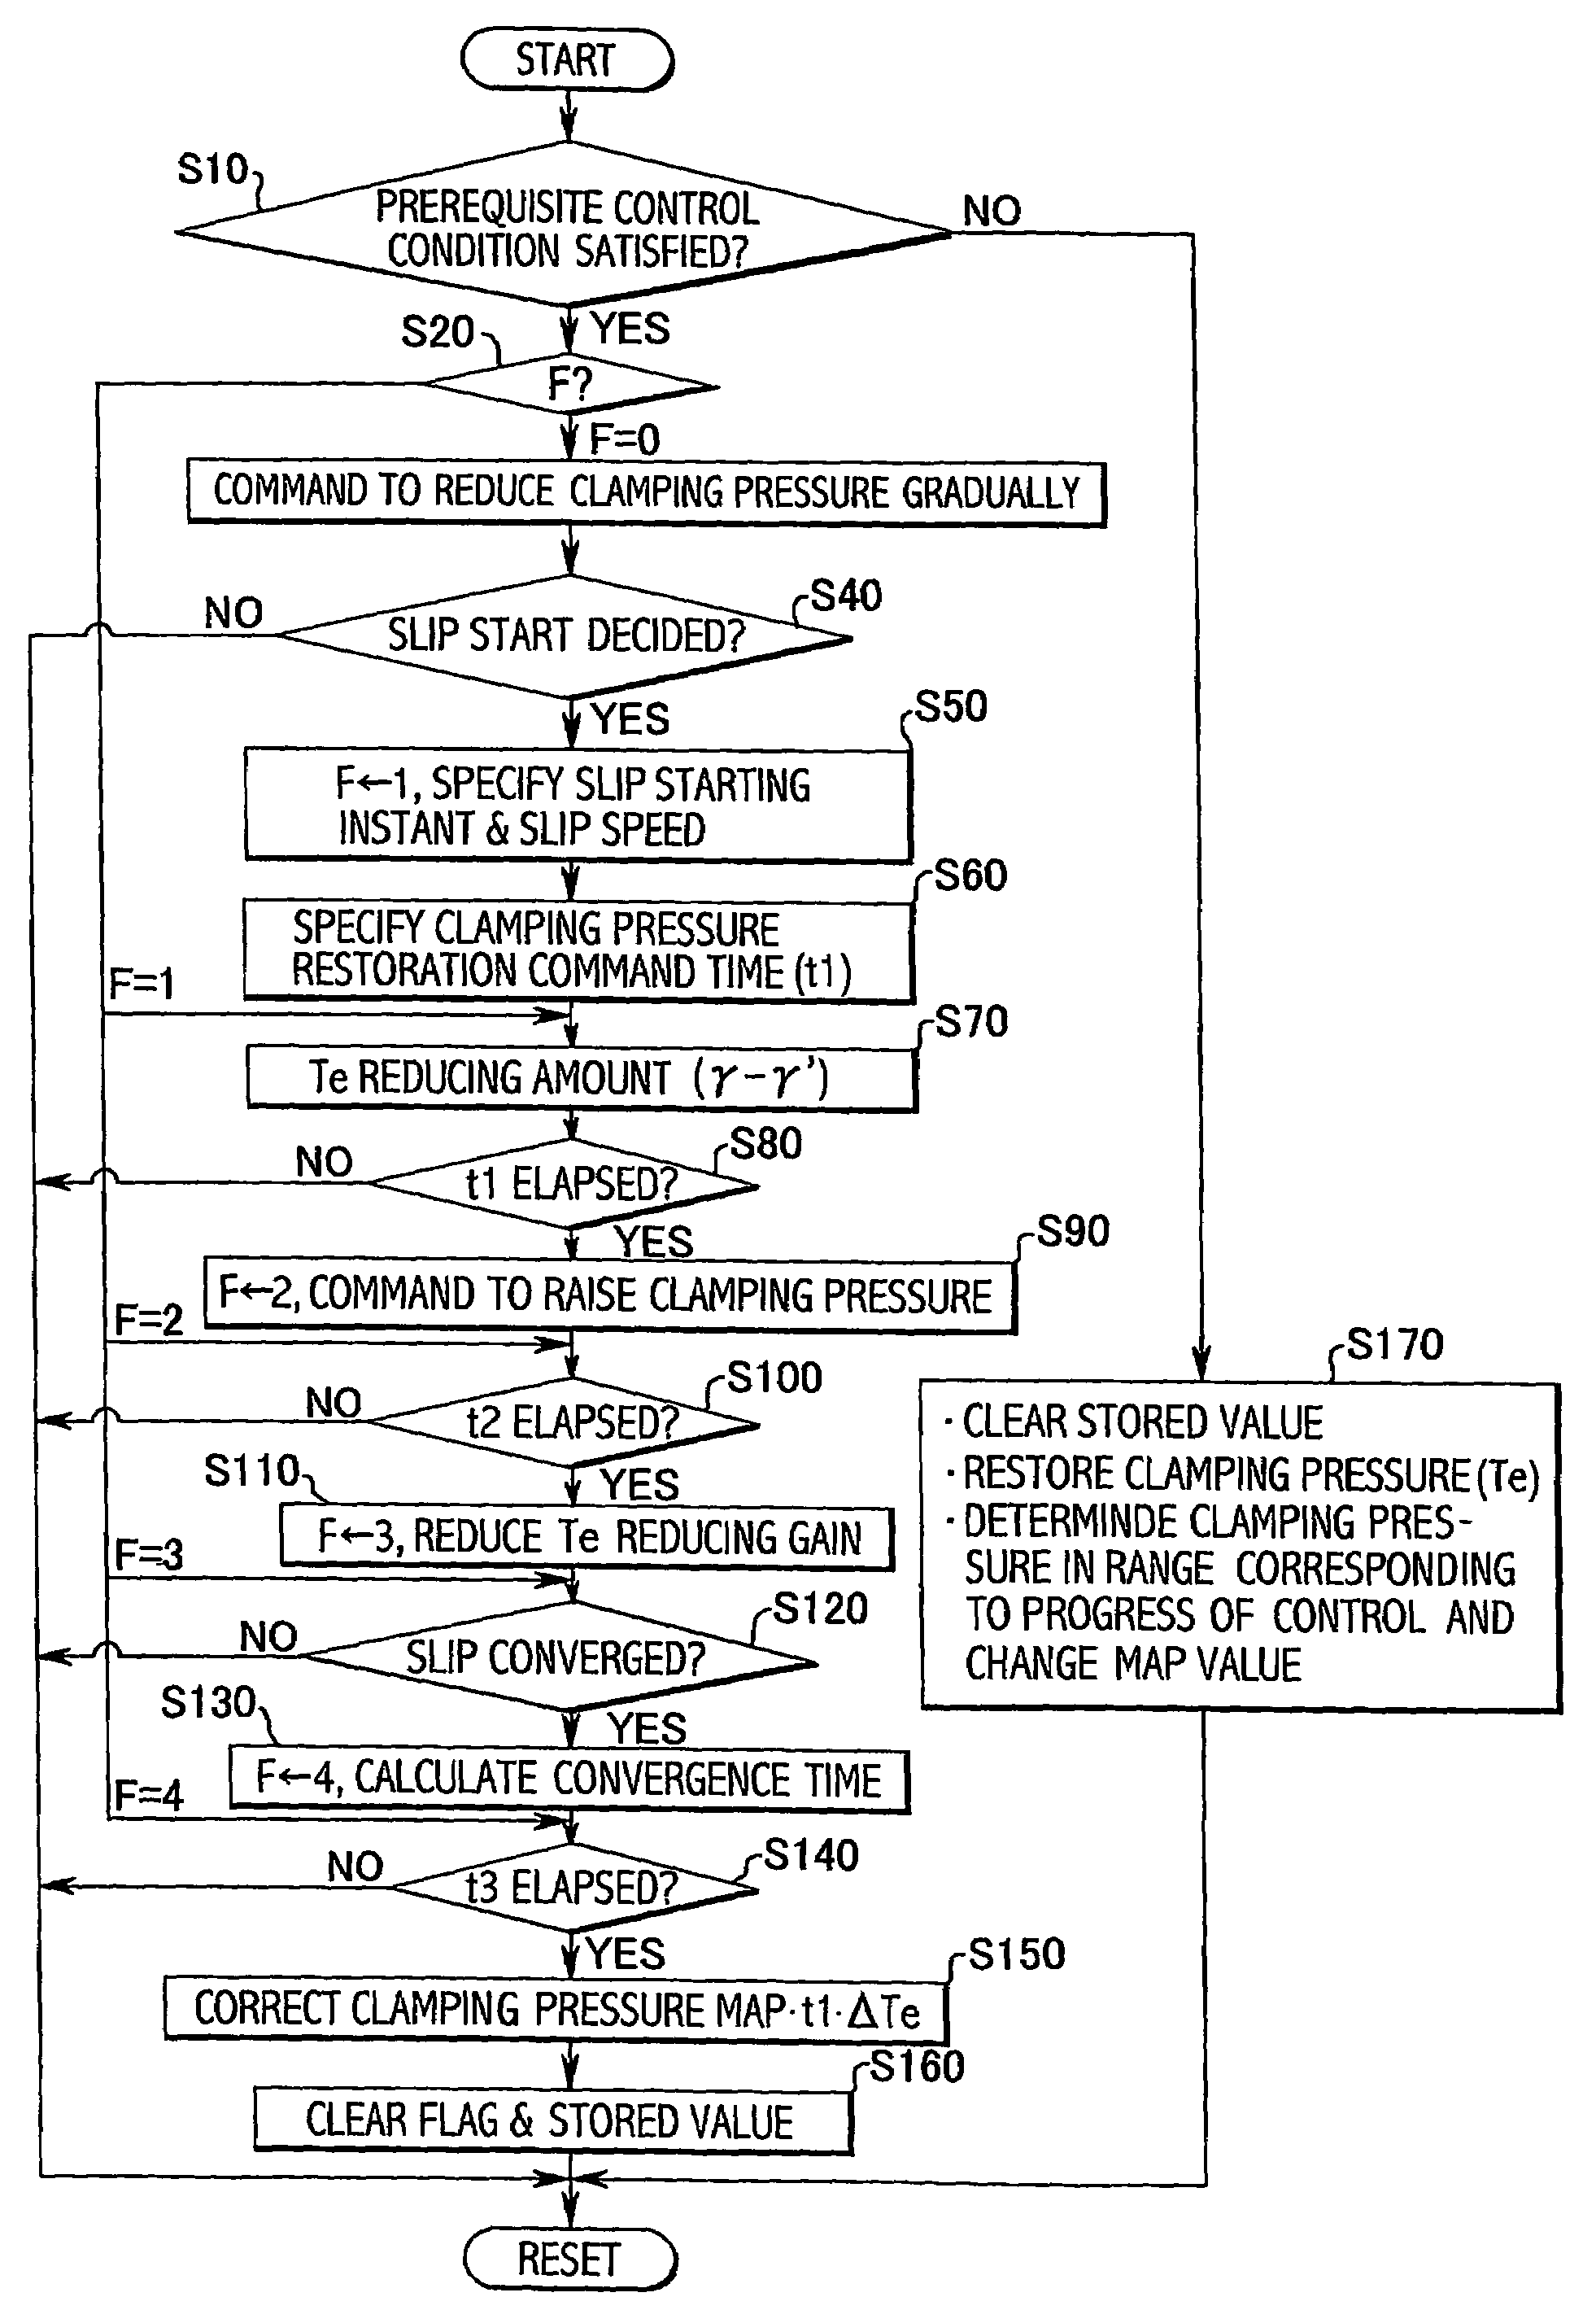 Cooperative control system for prime mover and continuously variable transmission of vehicle